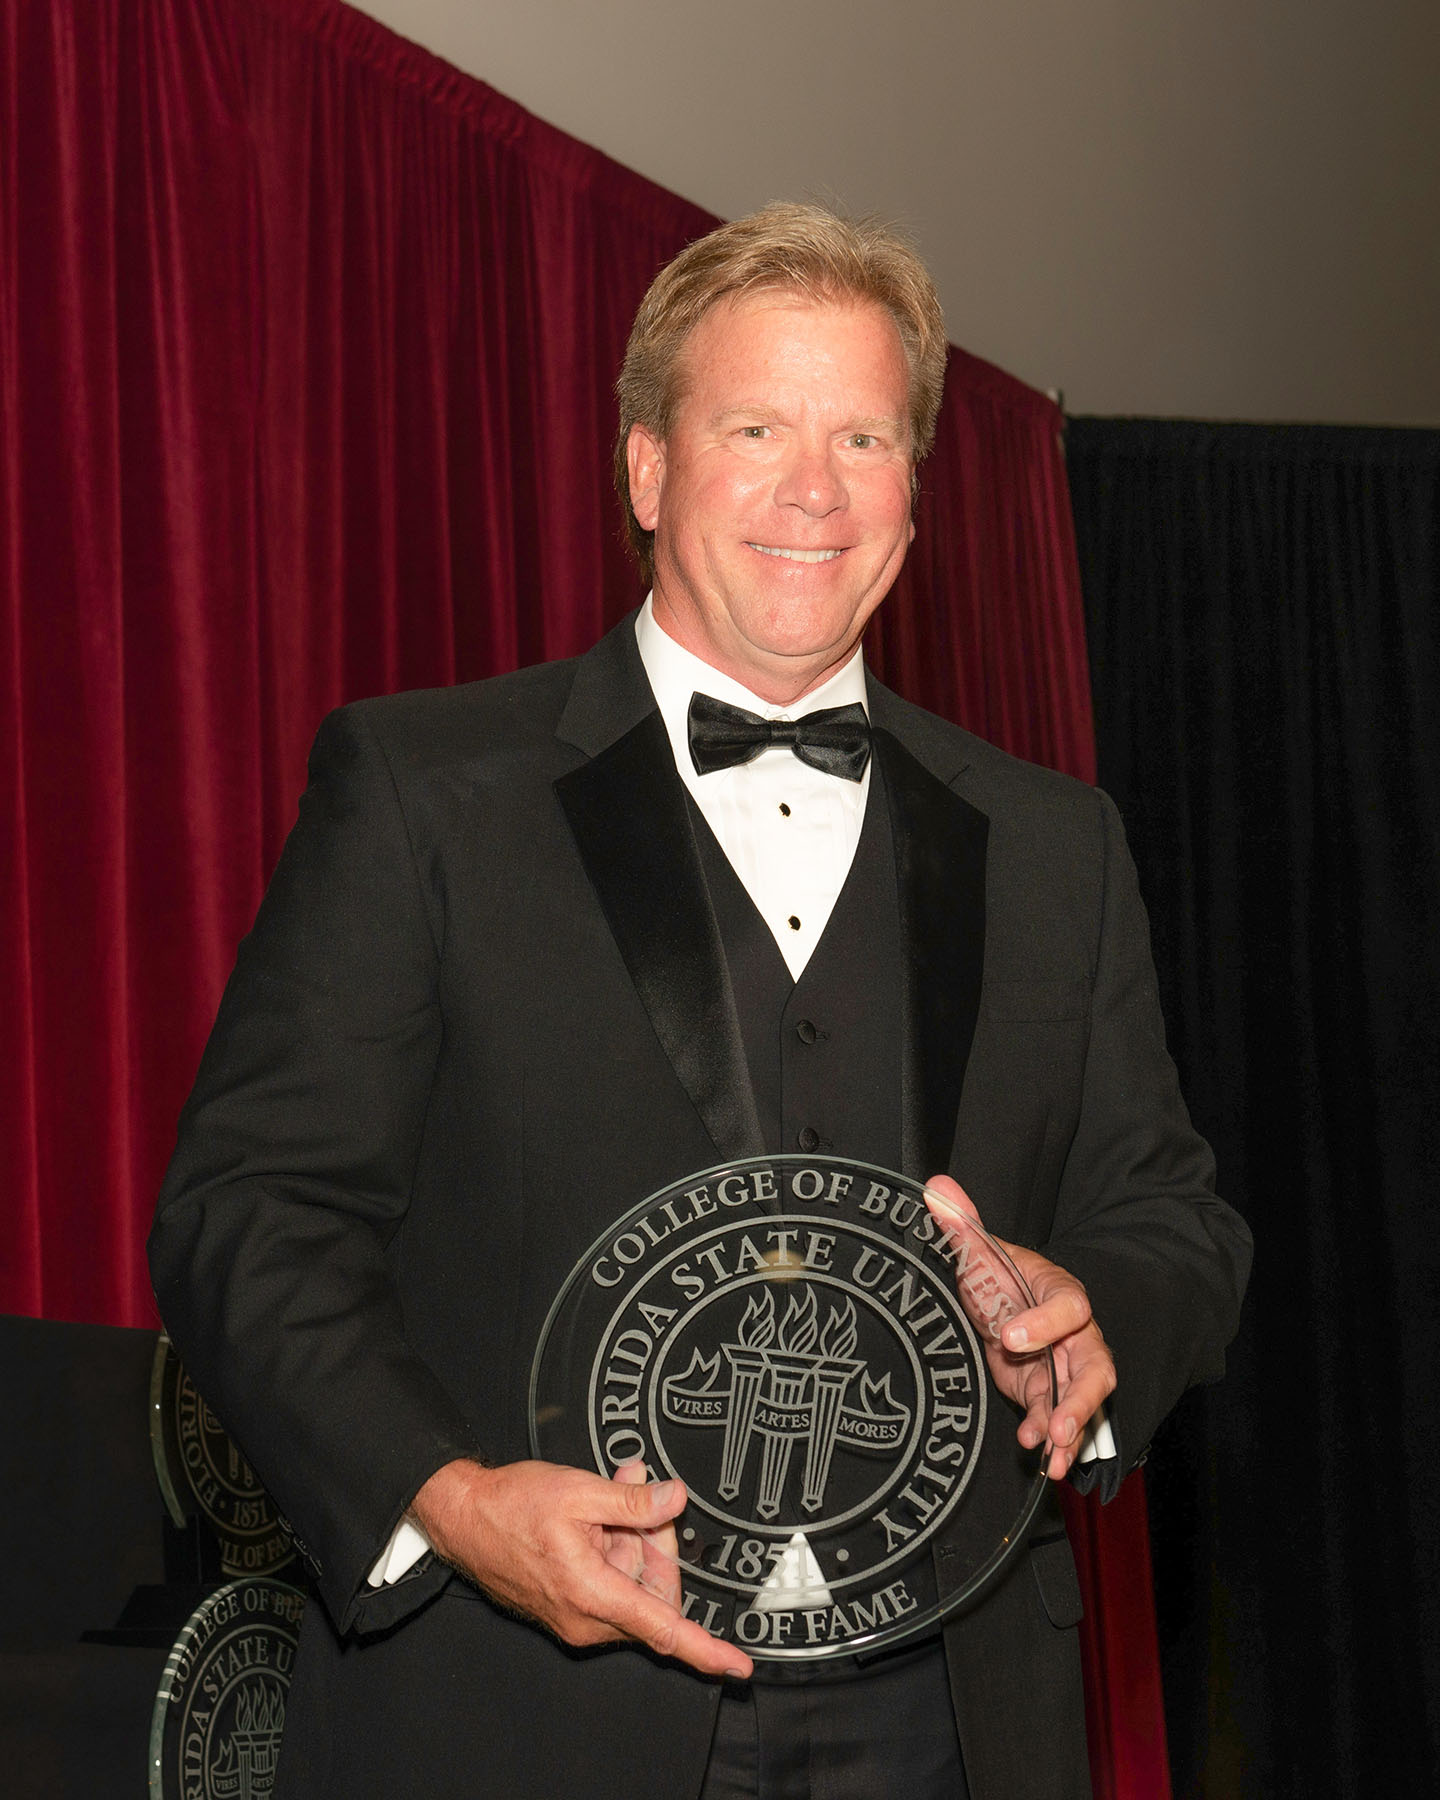 Brett Lindquist, a 2022 inductee into the College of Business Alumni Hall of Fame, has made a significant philanthropic investment to create the Brett C. Lindquist Endowed Directorship for the FSU Real Estate Center (Photo by Kallen Lunt/College of Business).